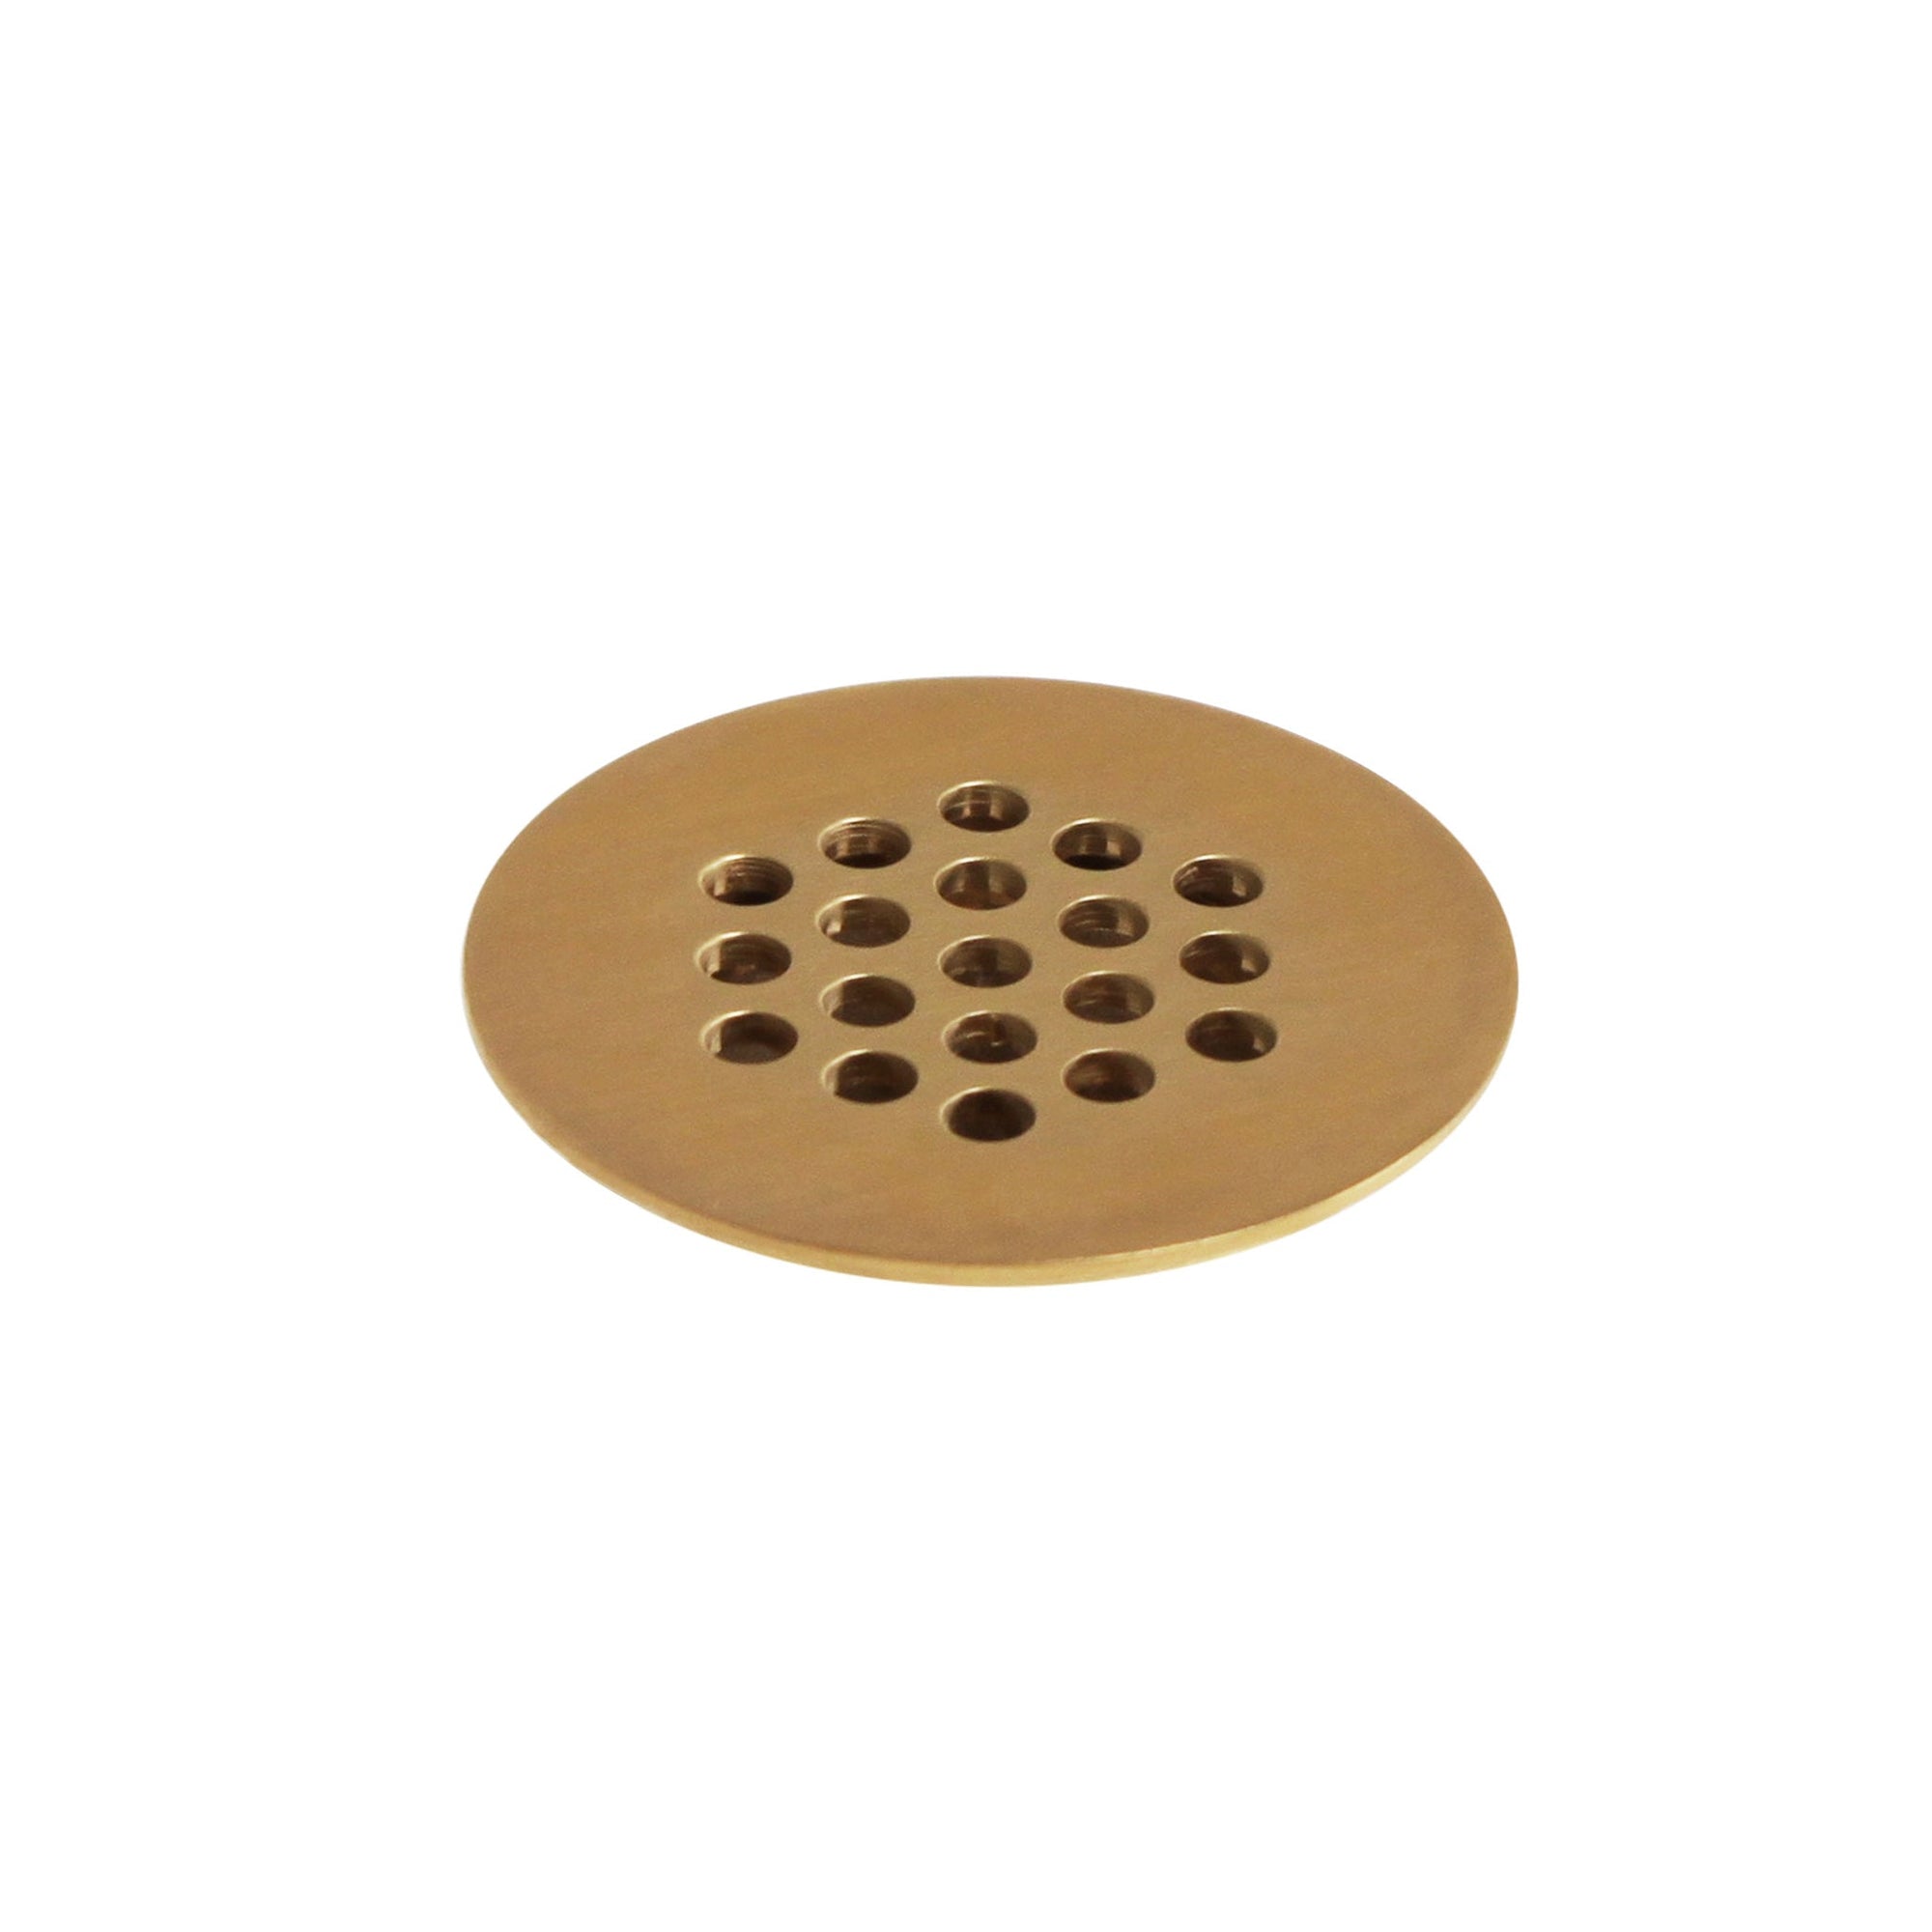 WSTE-STNR-GP Sherle Wagner International Strainer Waste Assembly in Gold Plate metal finish